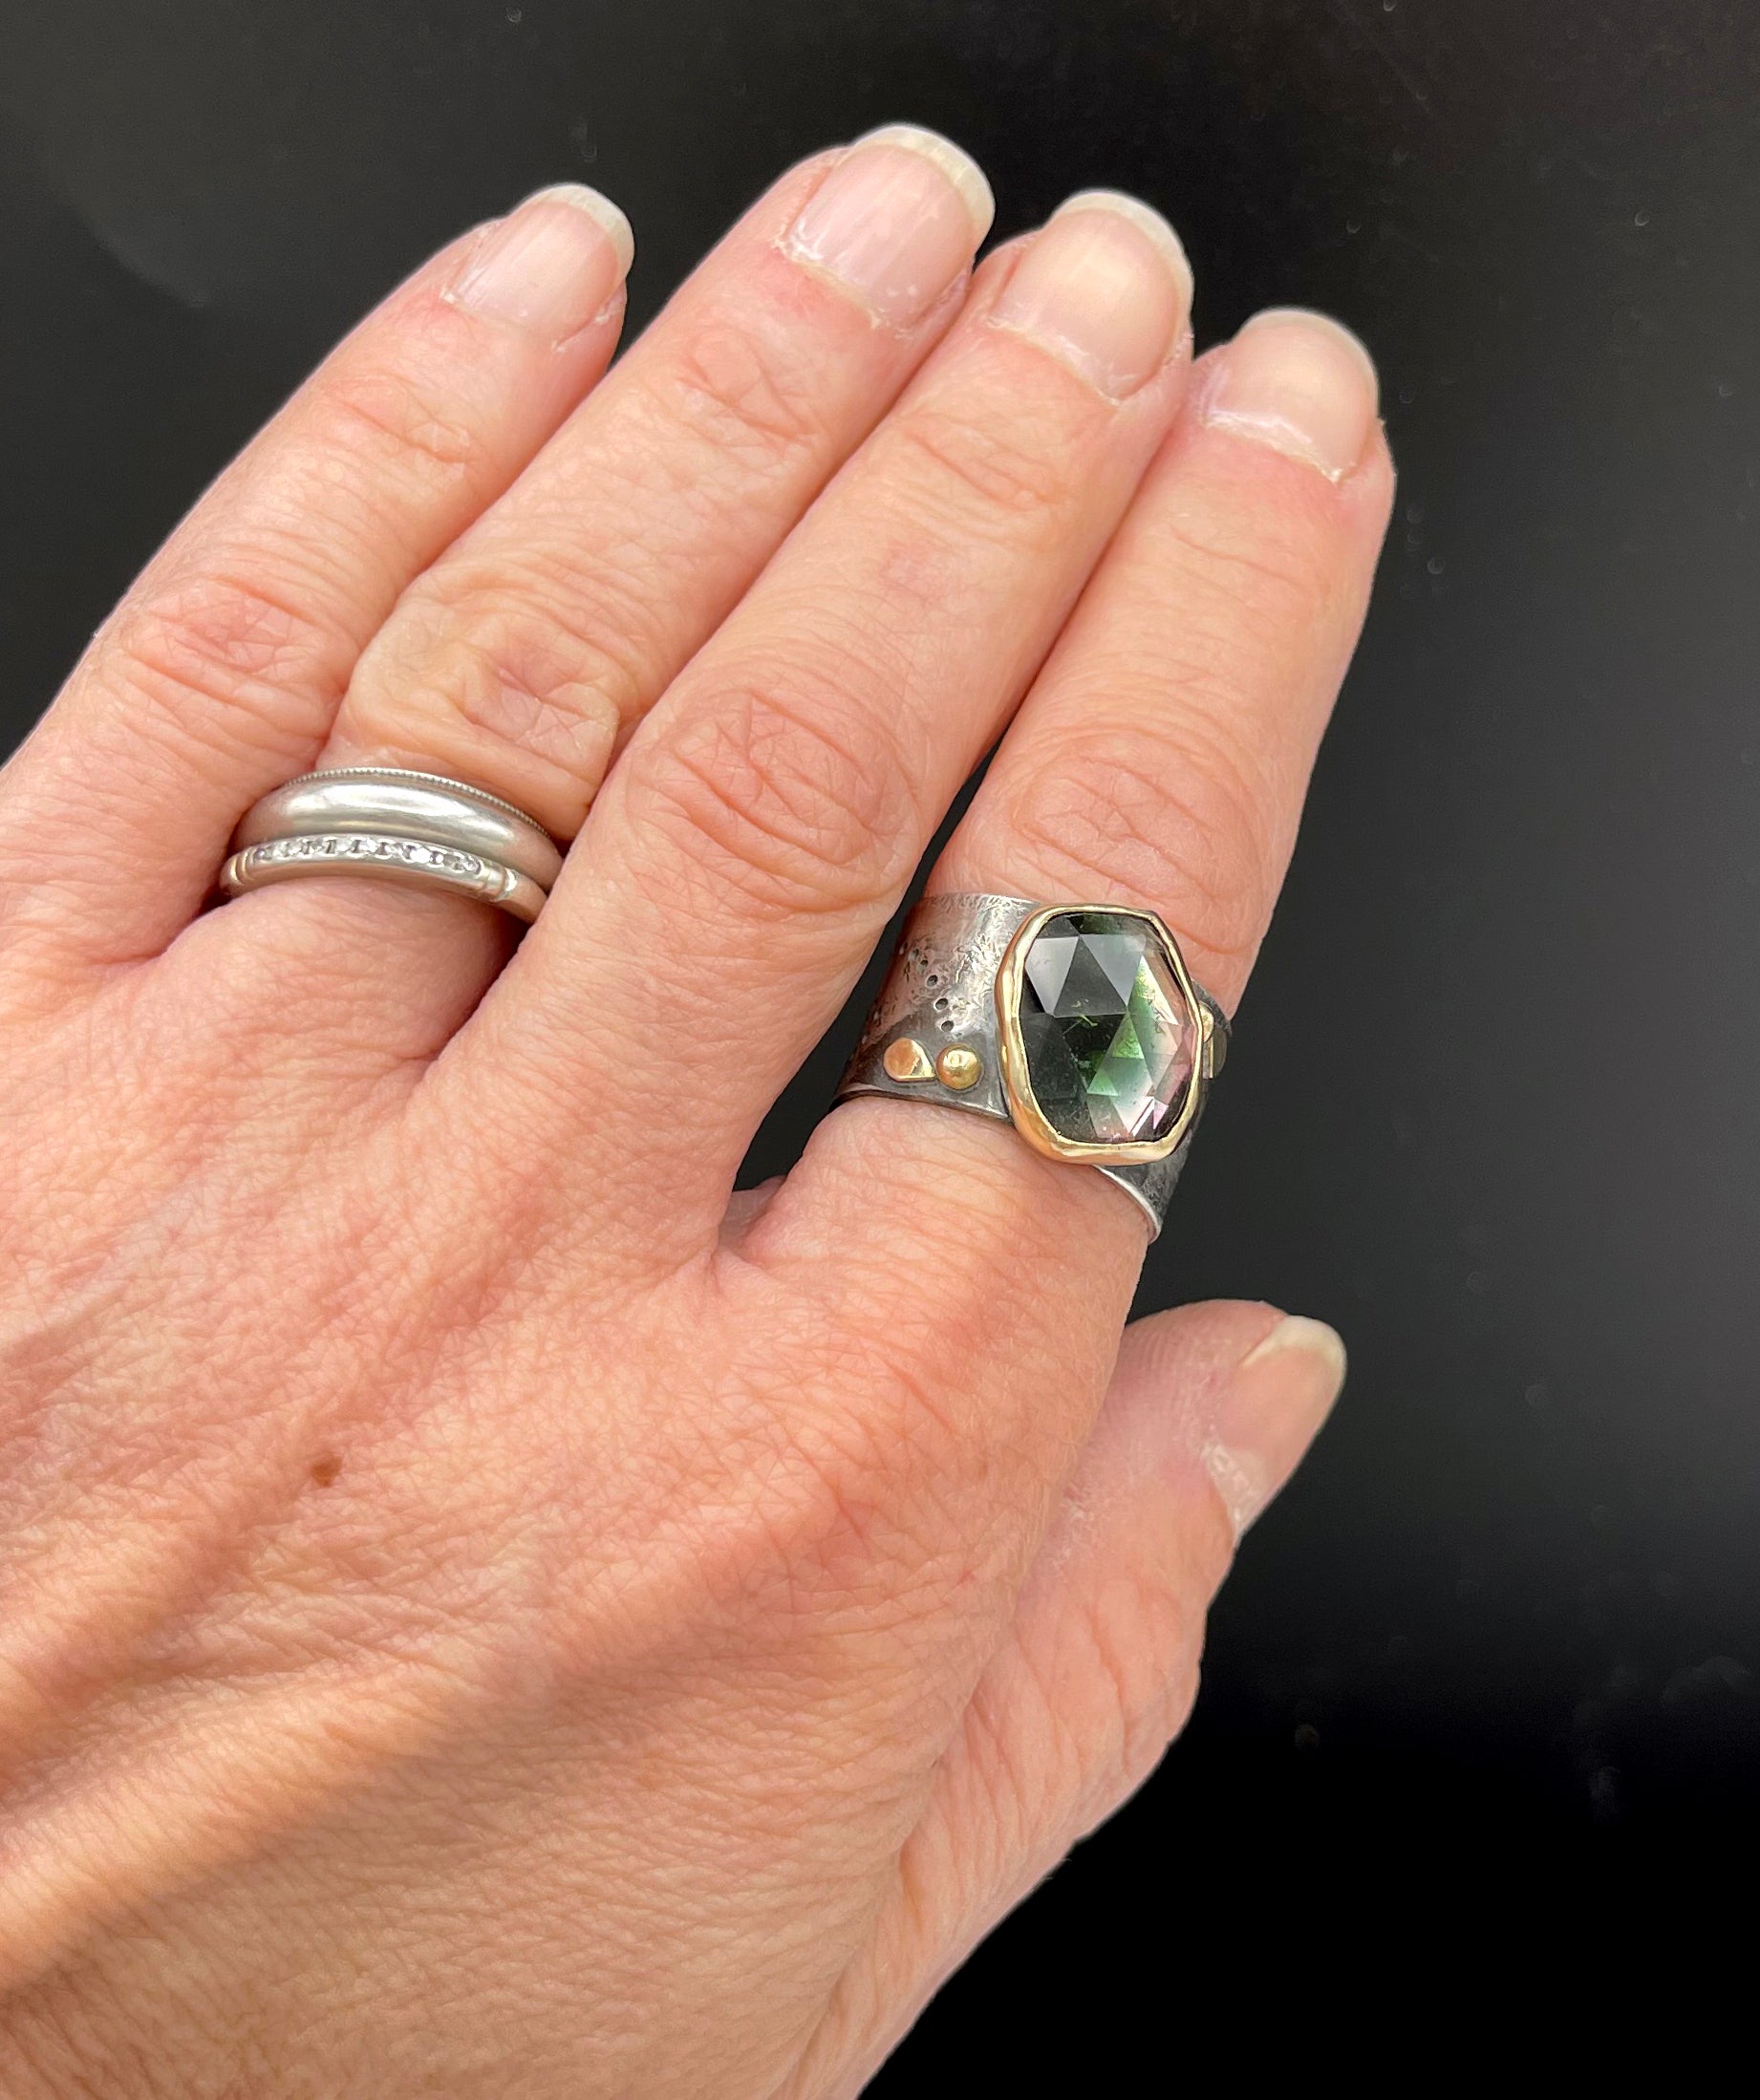 Bicolor Tourmaline Halle Ring, Wide Band 14K and Sterling Ring, One of a Kind